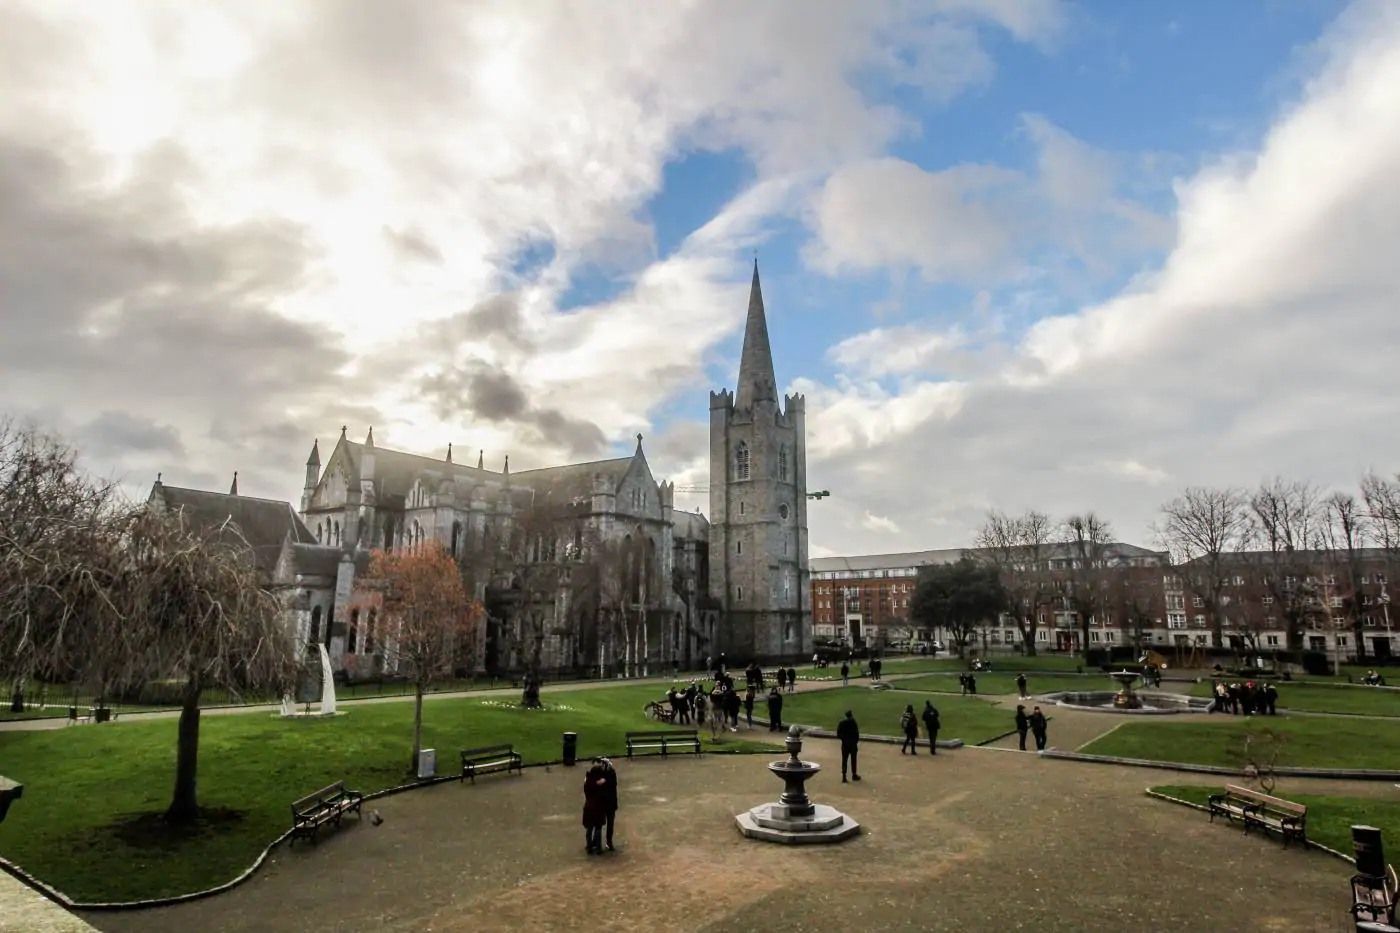 The grounds and view of St. Patrick's Cathedral in Dublin, Ireland.